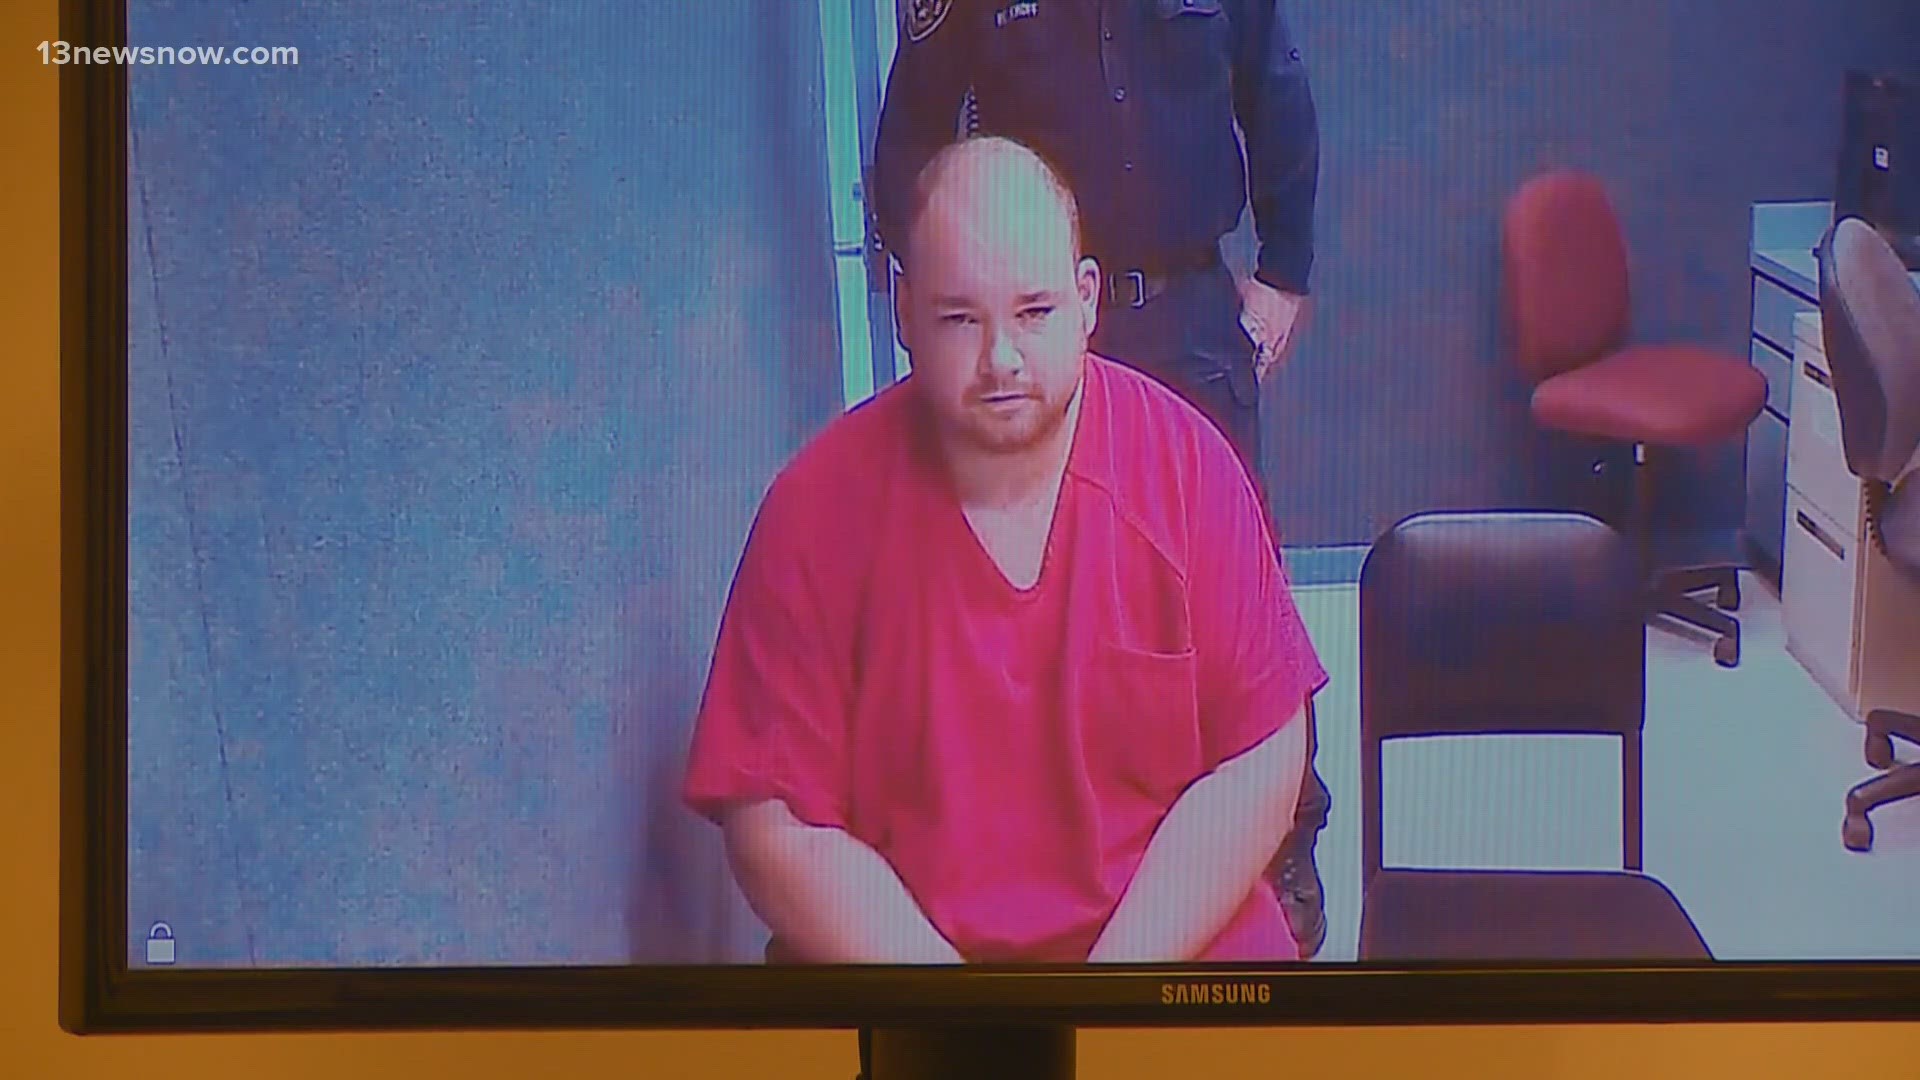 Jonathan Moore pled guilty to one count each of first-degree murder and using a knife in the commission of a felony, according to online court documents.